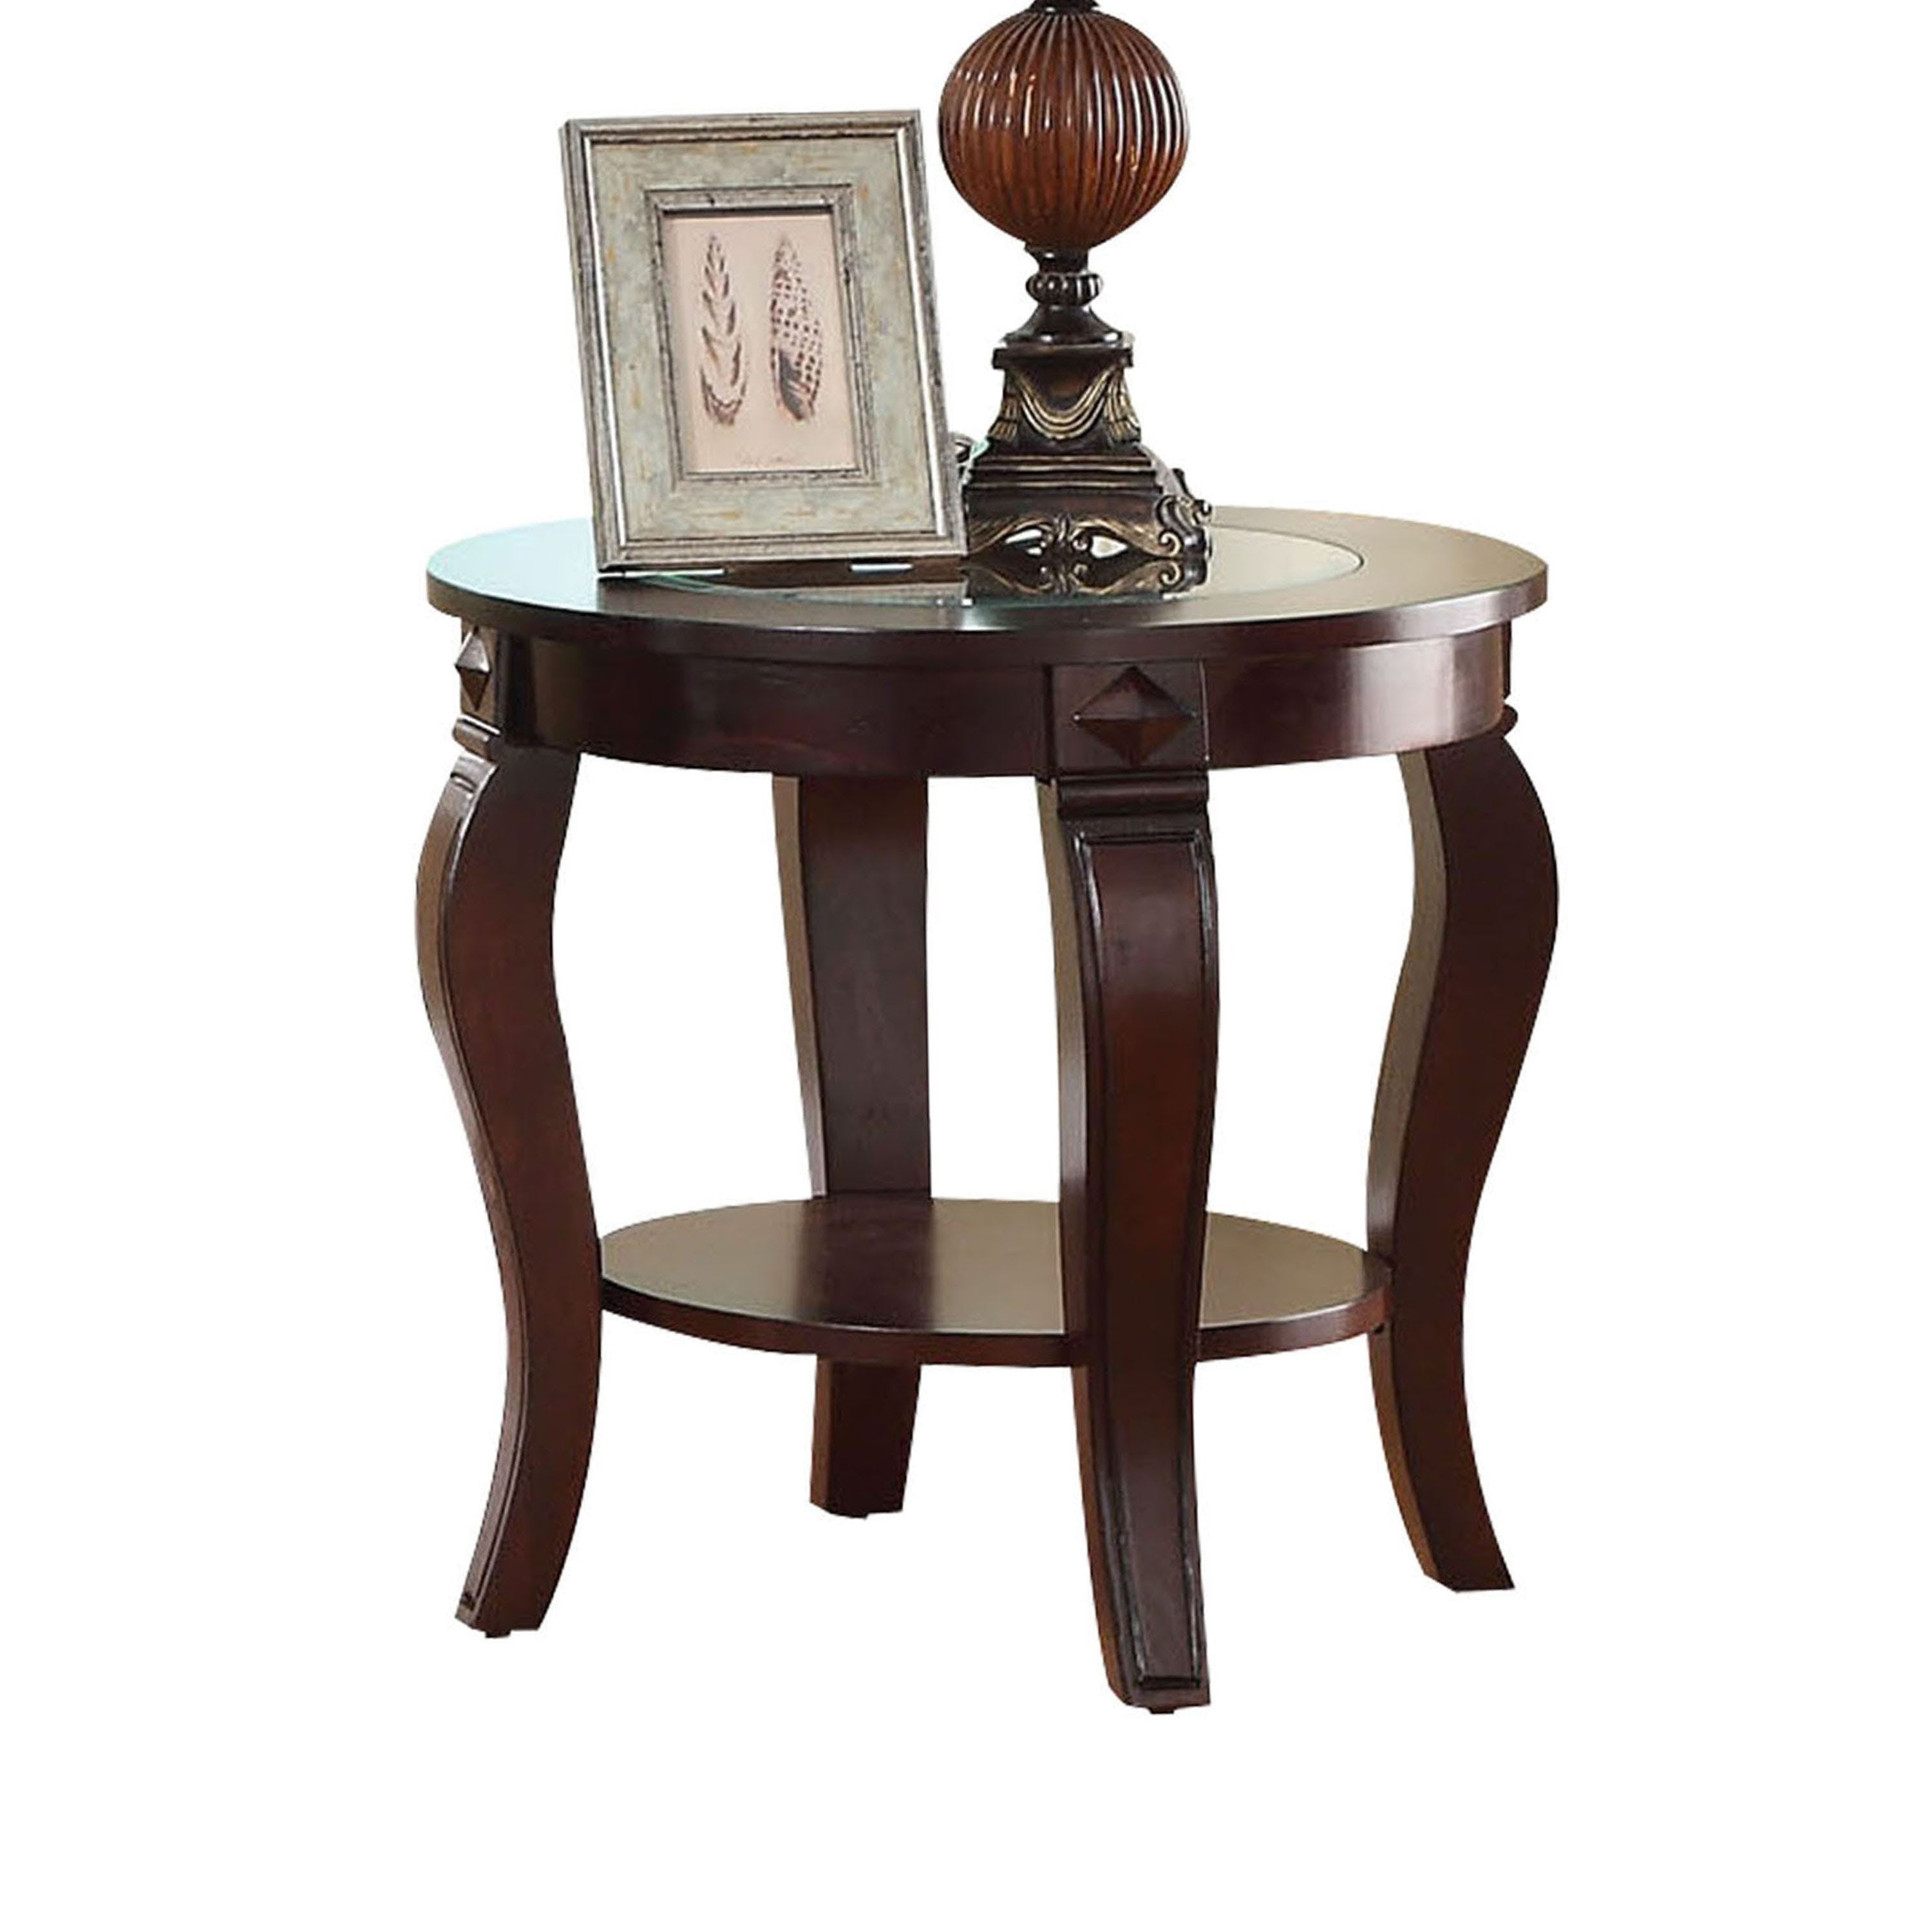 round wooden end table with glass insert top walnut brown free shipping today tures sofa tables behind couches who sells universal furniture oval and chrome coffee inch dark wood